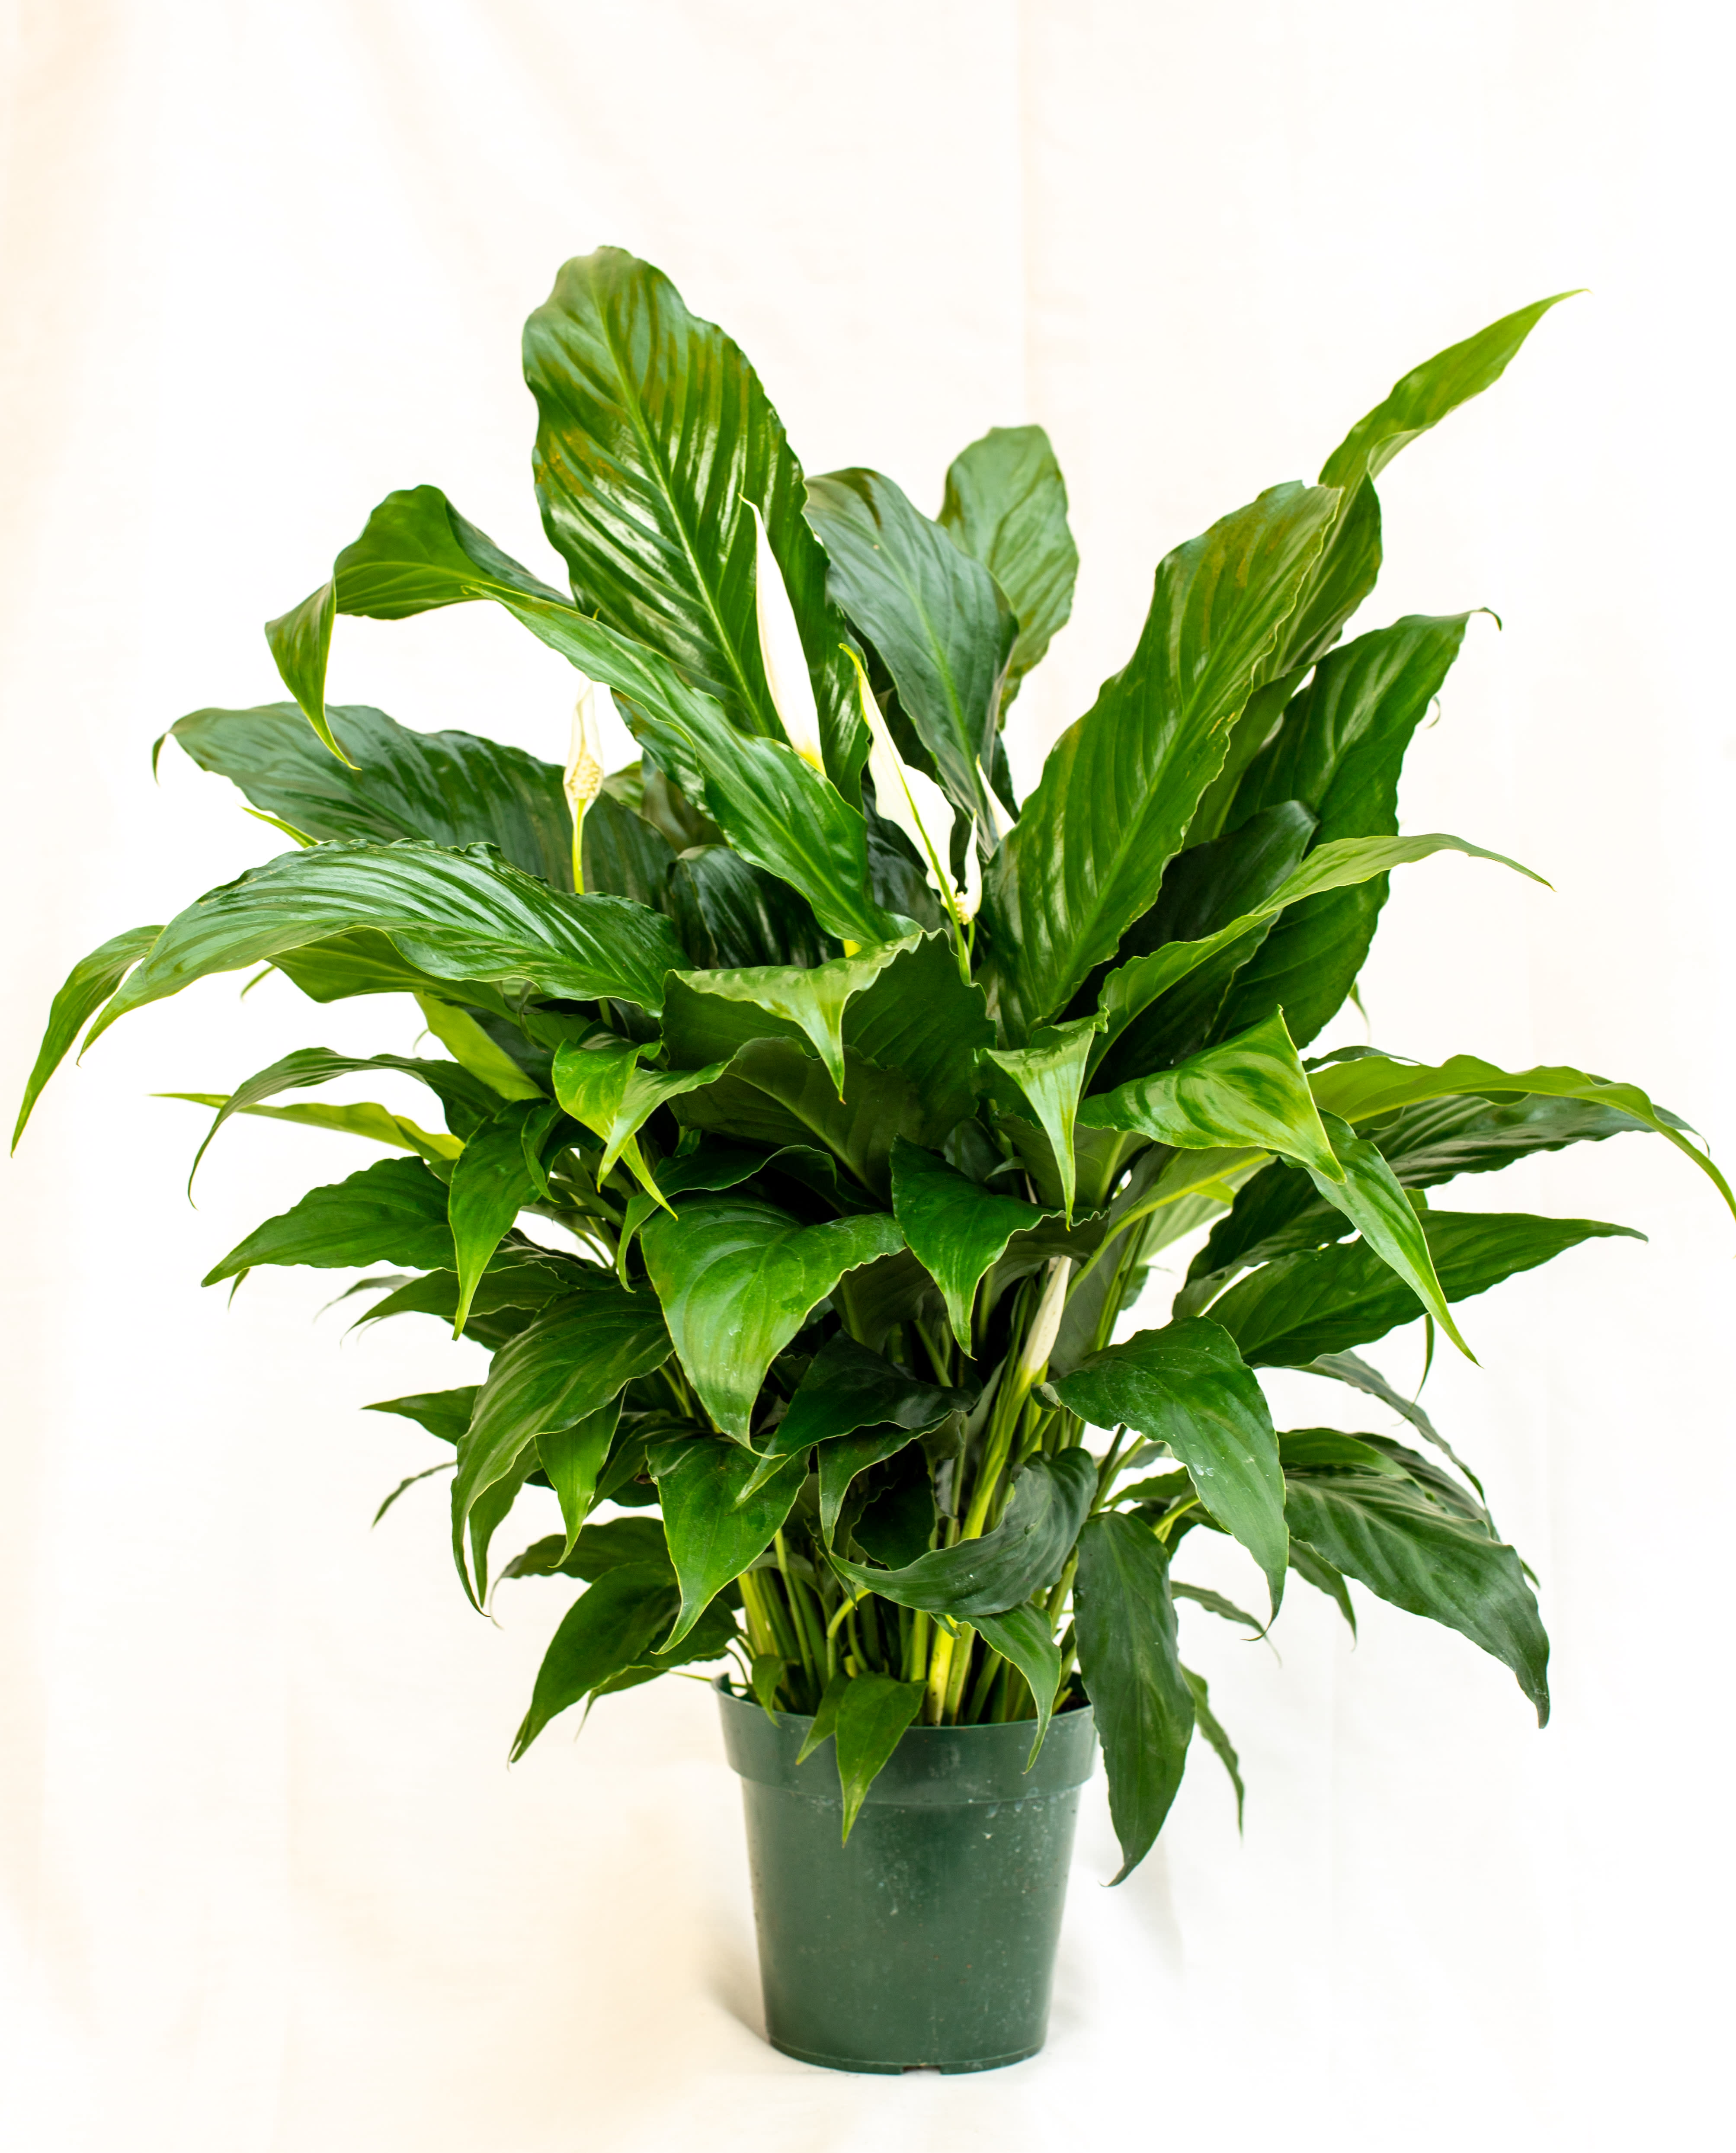 Spathiphyllum &quot;Peace Lily&quot; - Common house plant, easy care, low light tolerant.  Commonly sent to homes or funeral homes as an expression of sympathy. 6&quot; pot